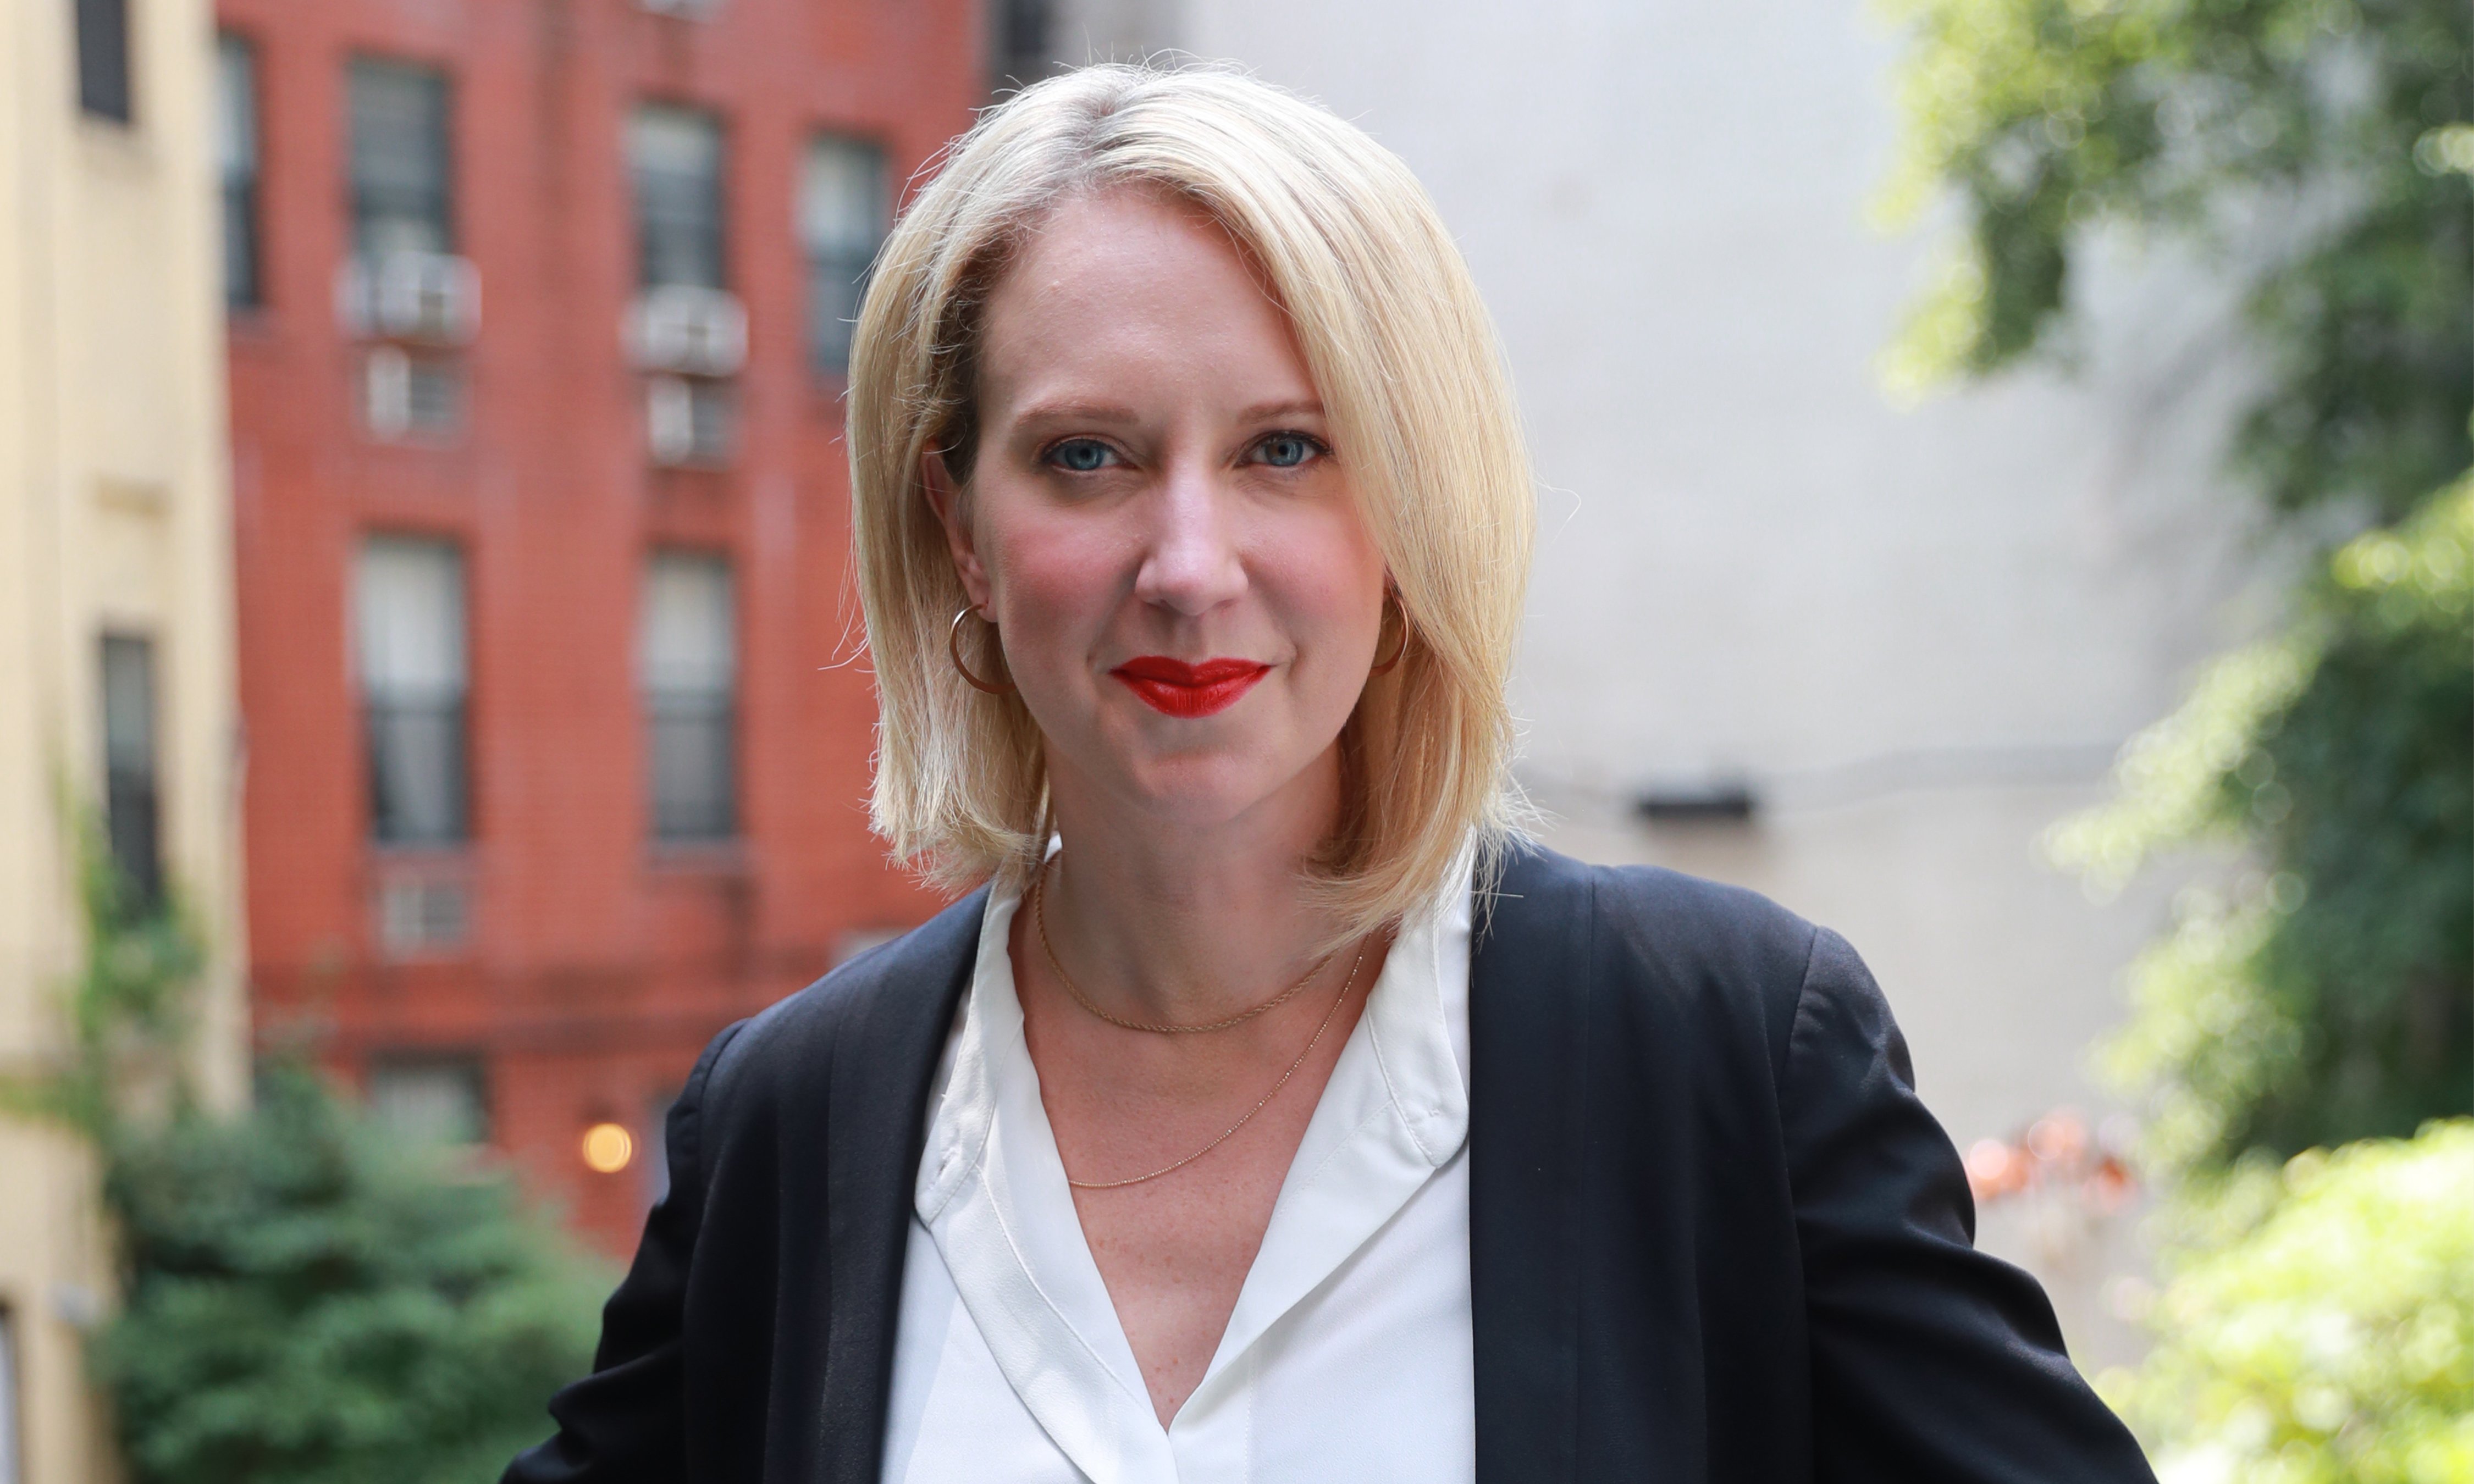 Lucy Lang, a former Manhattan assistant district attorney, has announced she's running for Manhattan District Attorney in 2021. Courtesy photo.